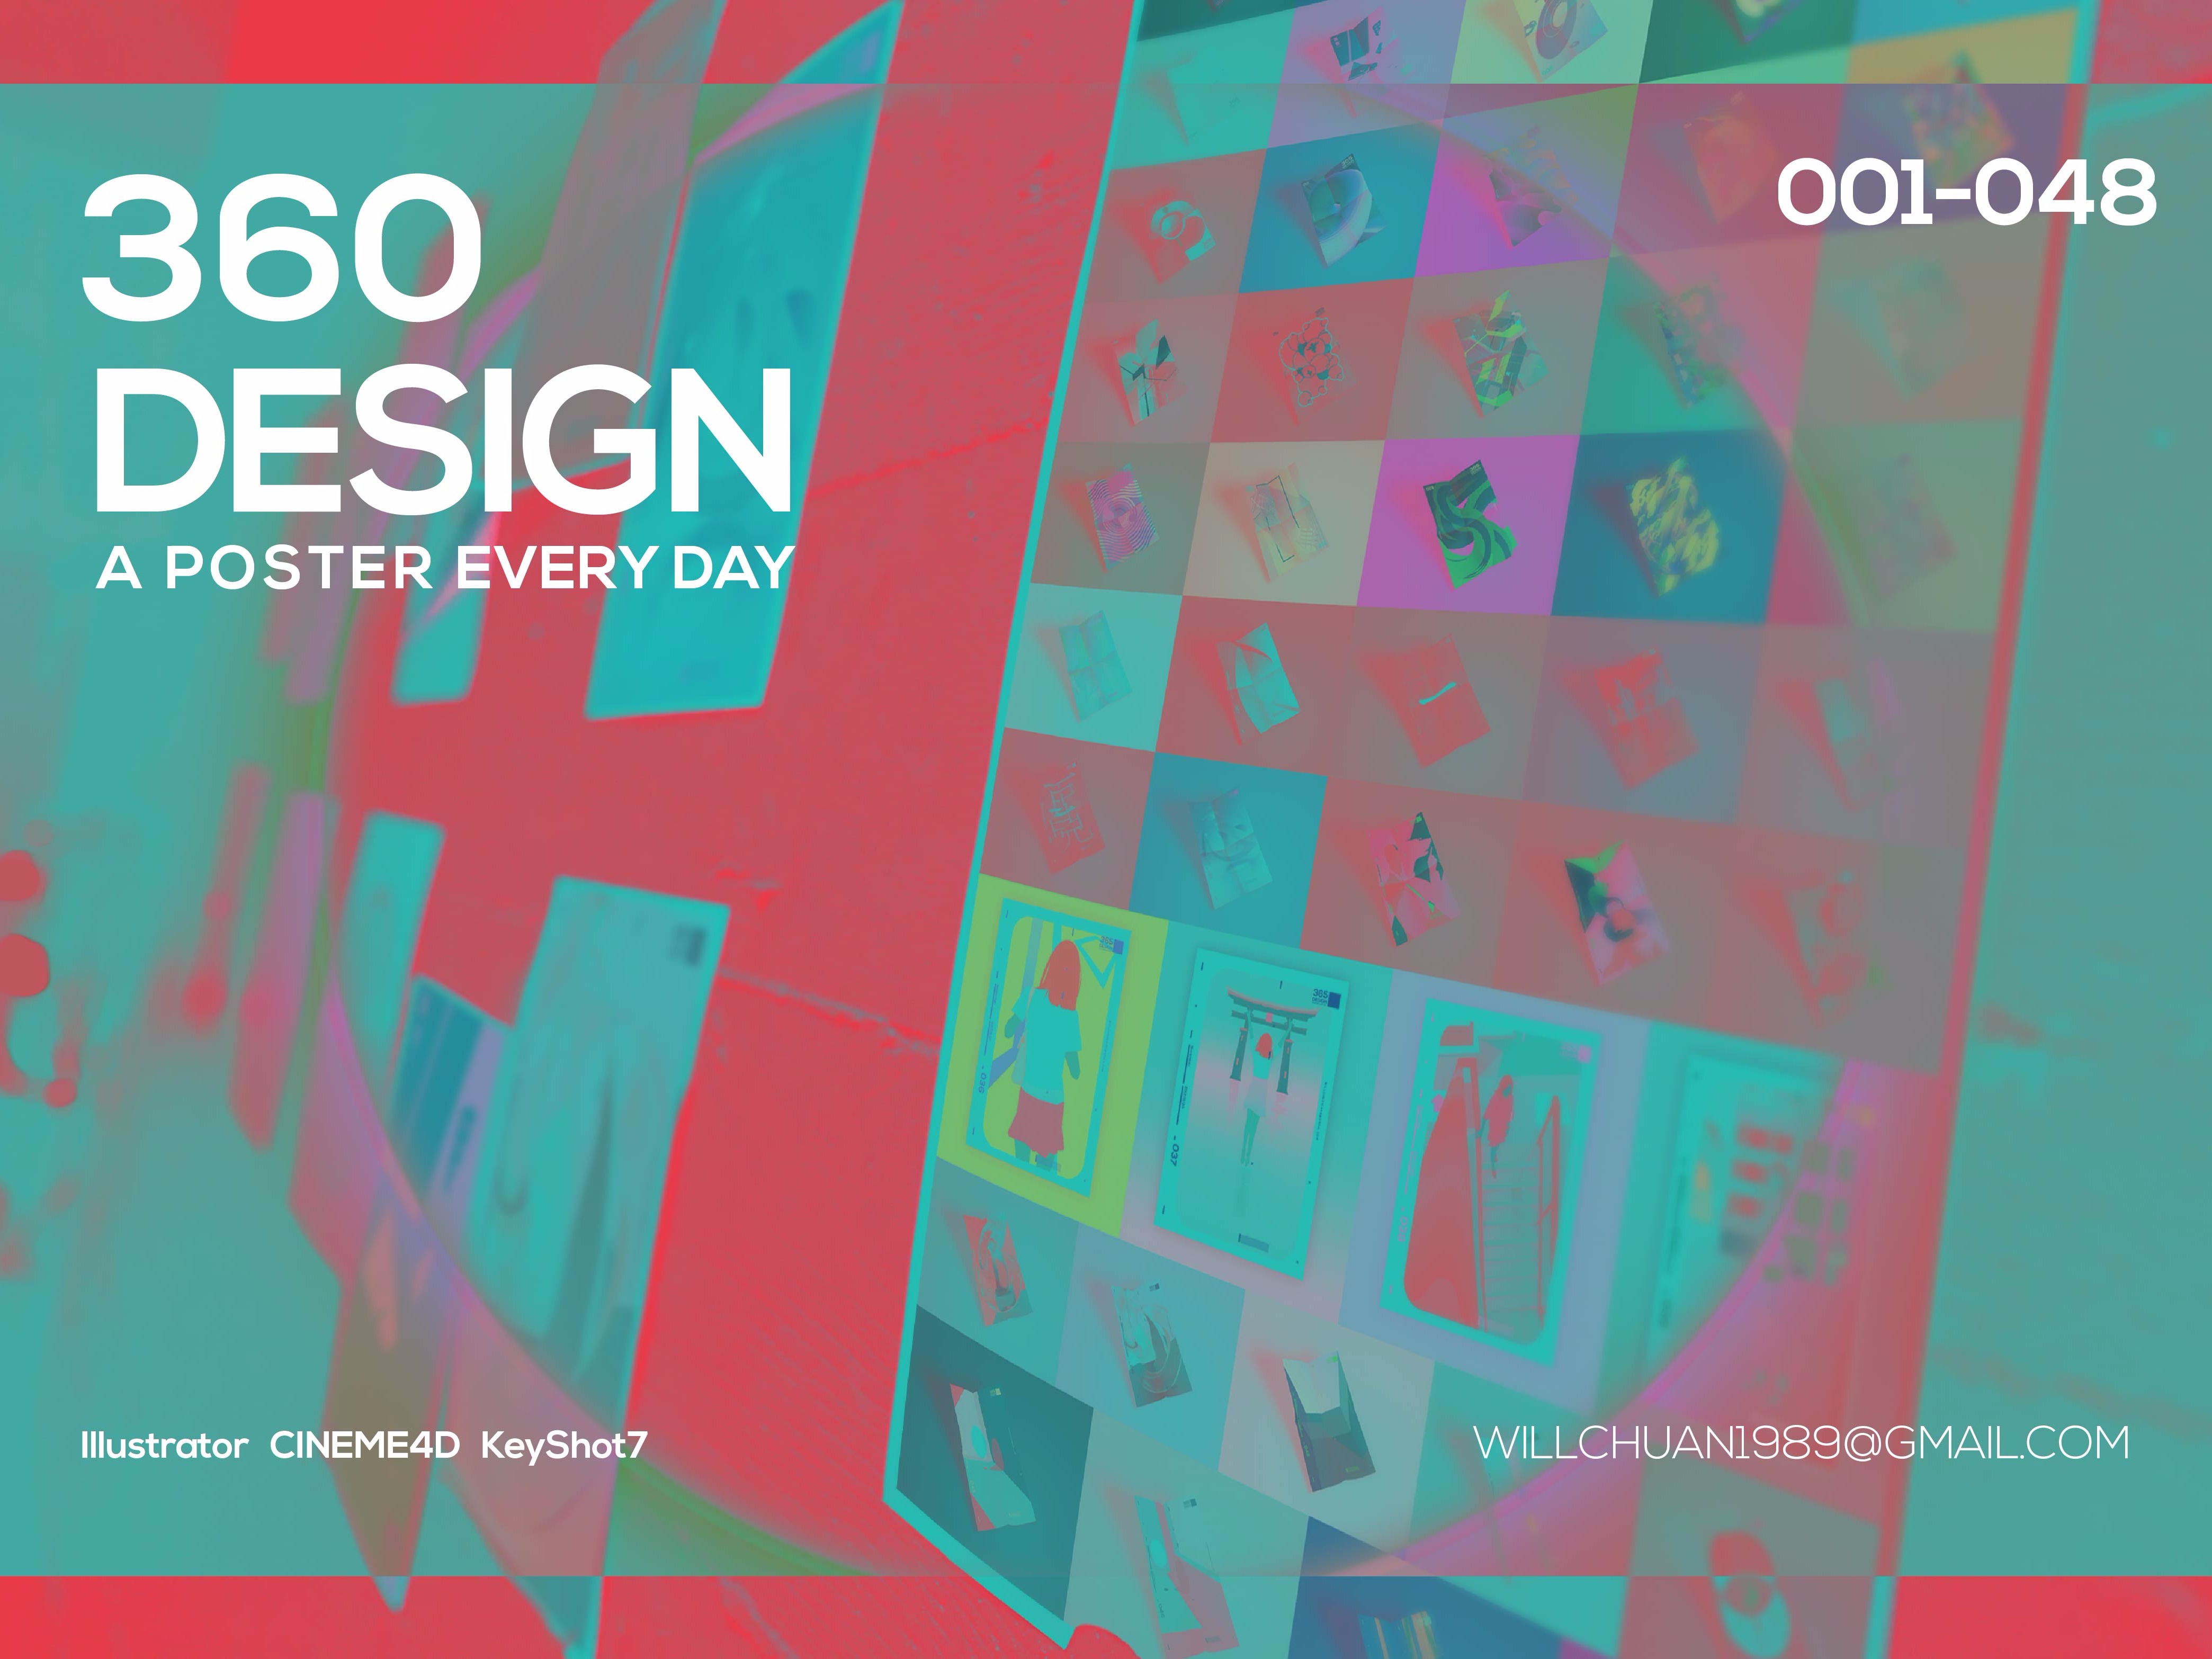 360DESIGN A POSTER EVERY DAY 001-048